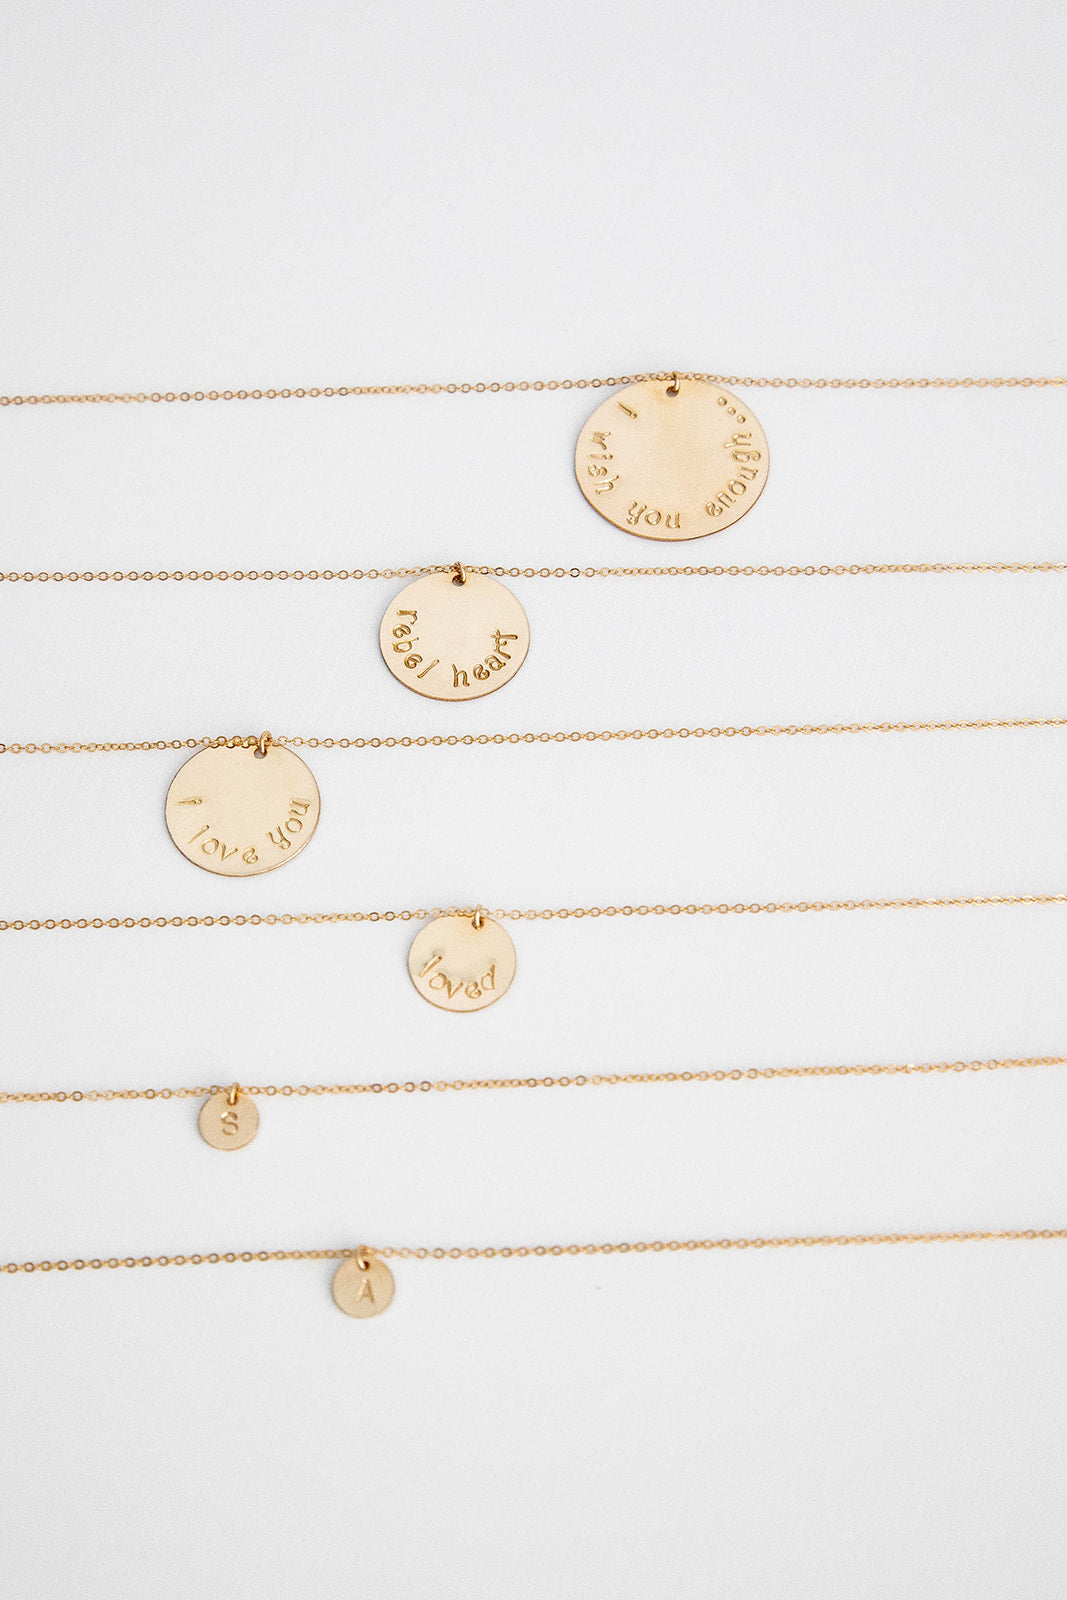 Six 14k gold filled chain necklaces with 14k gold filled discs with hand stamped letters laying on a white background. 